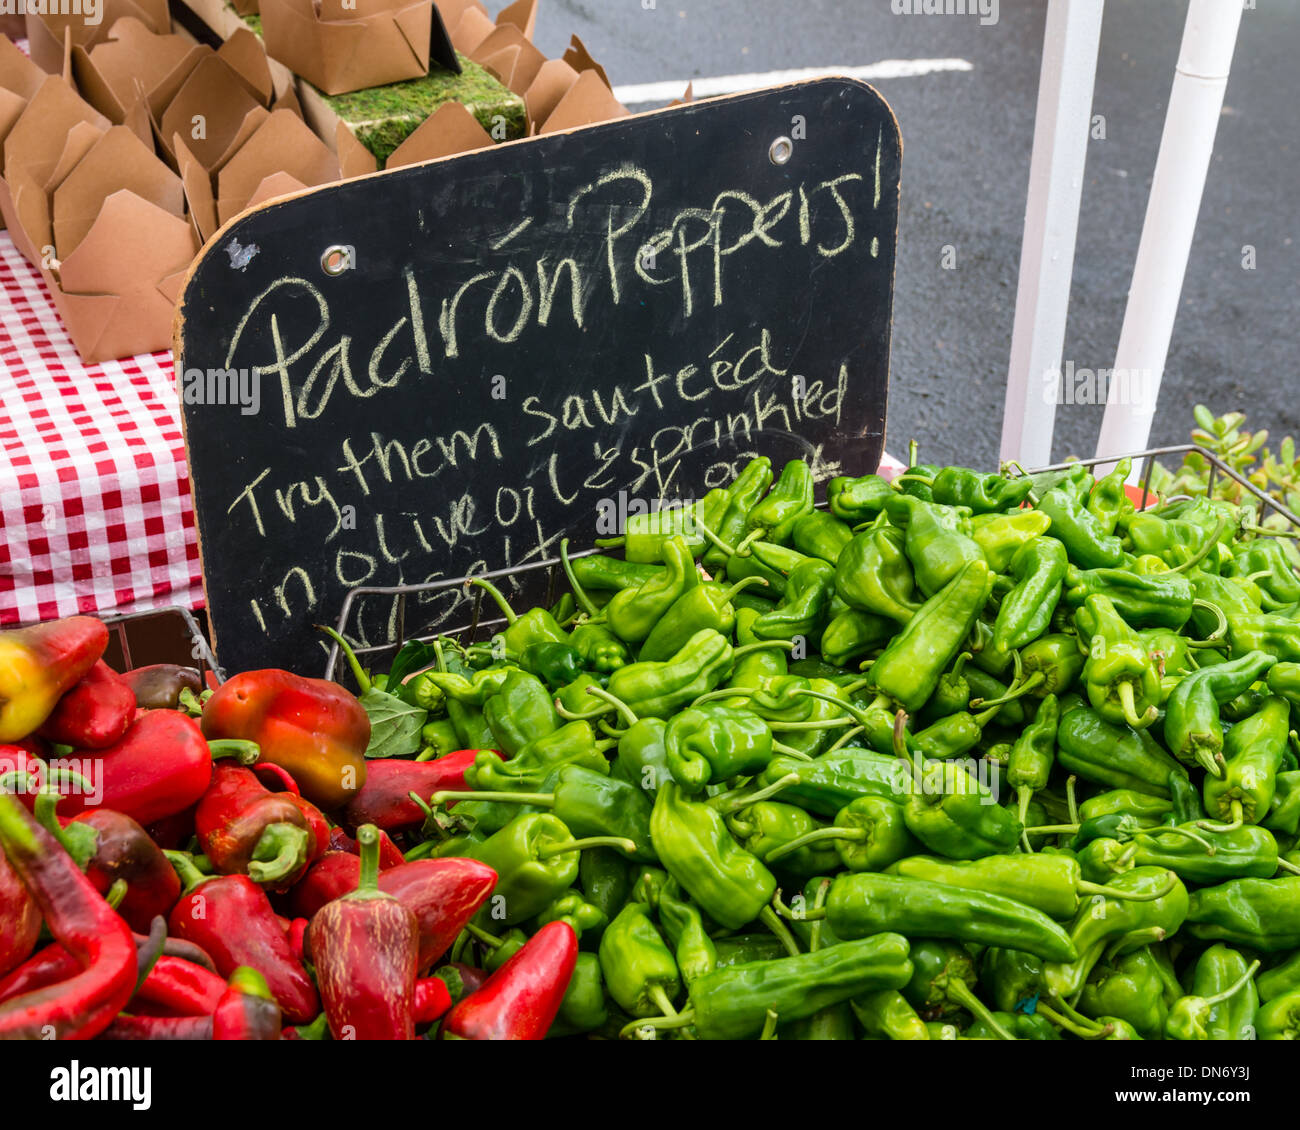 Display of fresh green padron peppers at a farmers market.  Beaverton, Oregon Stock Photo